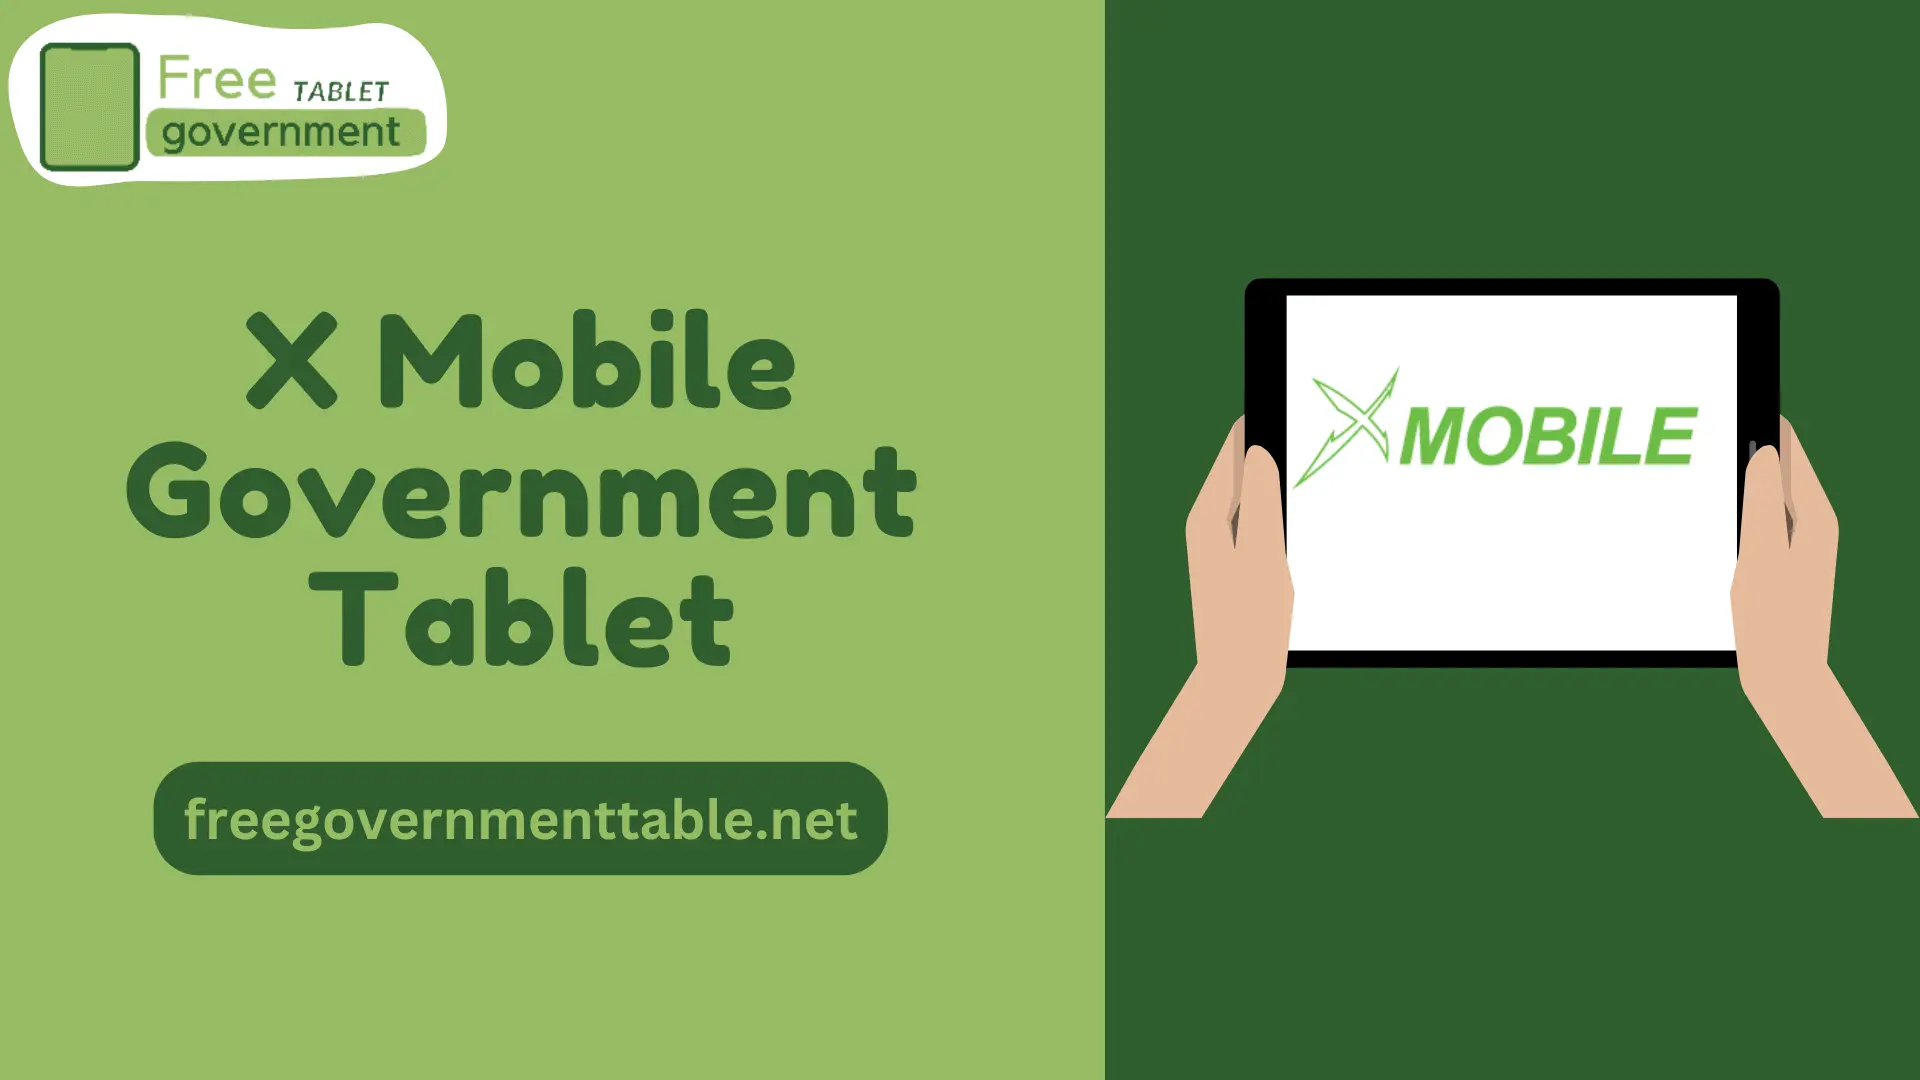 How to Get X Mobile Government Tablet